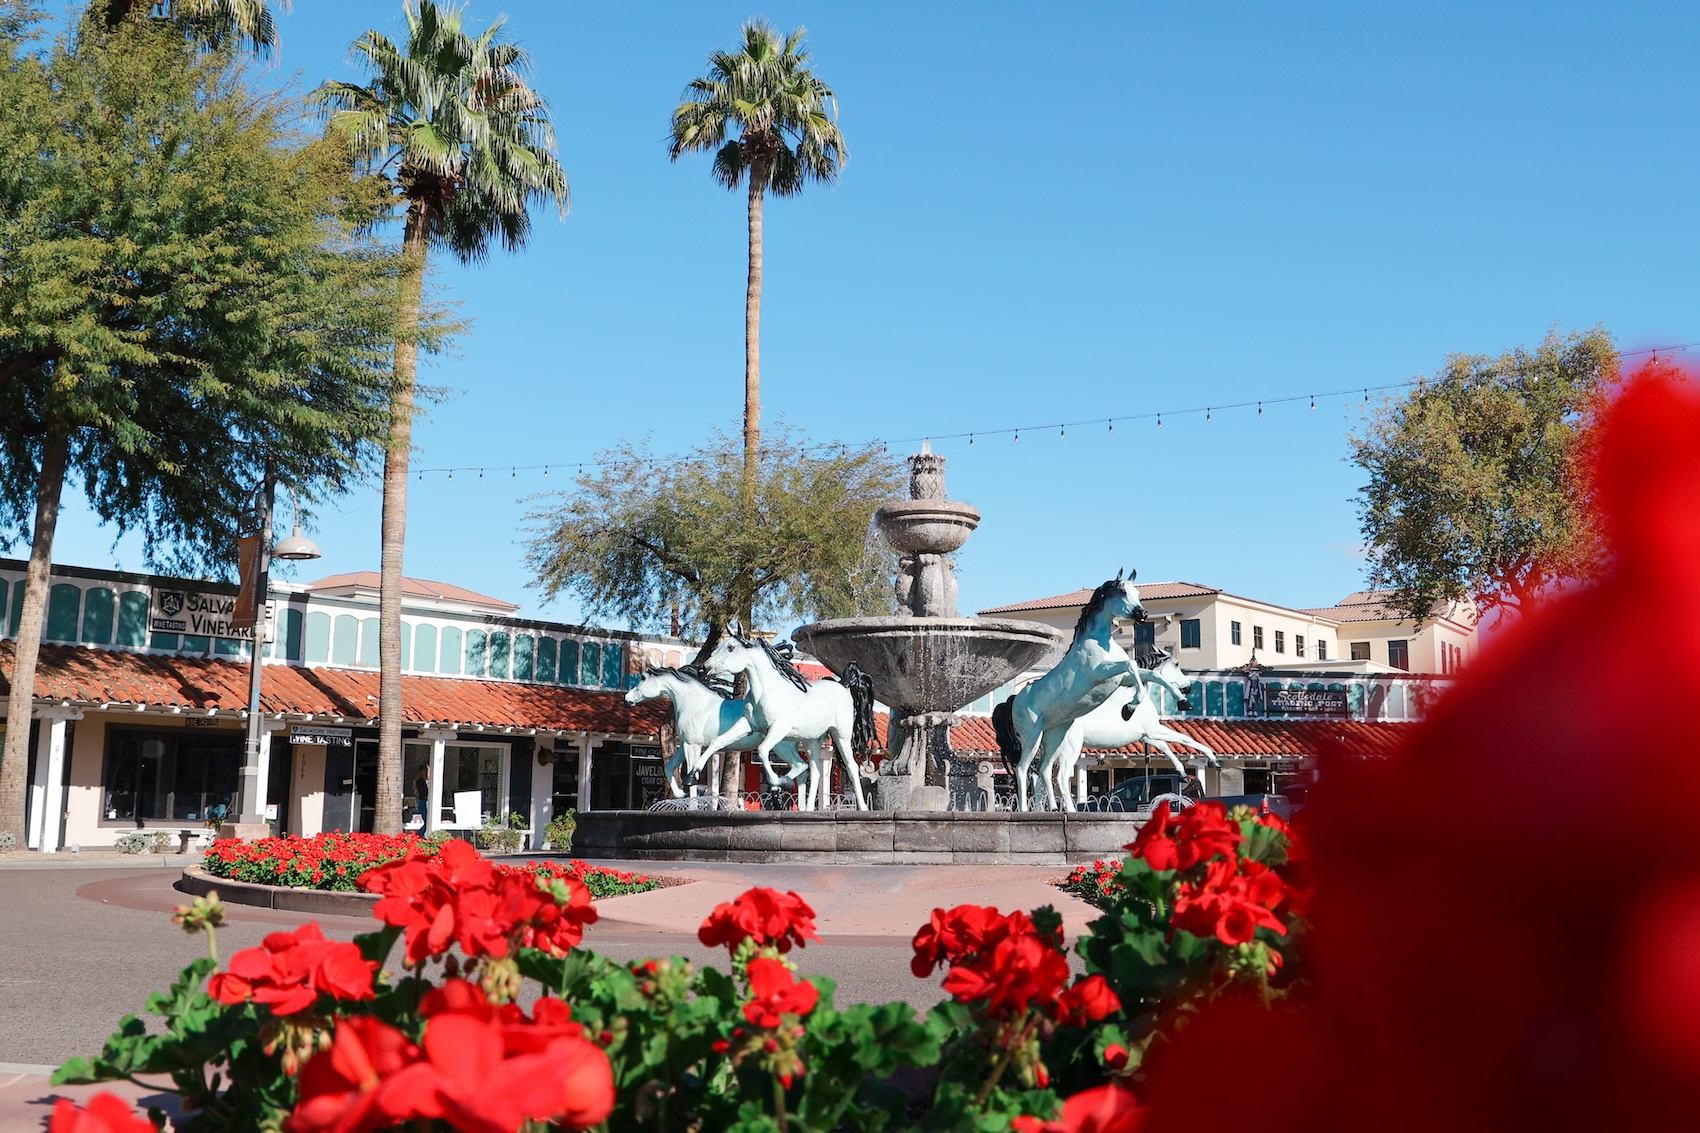  Scottsdale is One of the Happiest Cities in America 